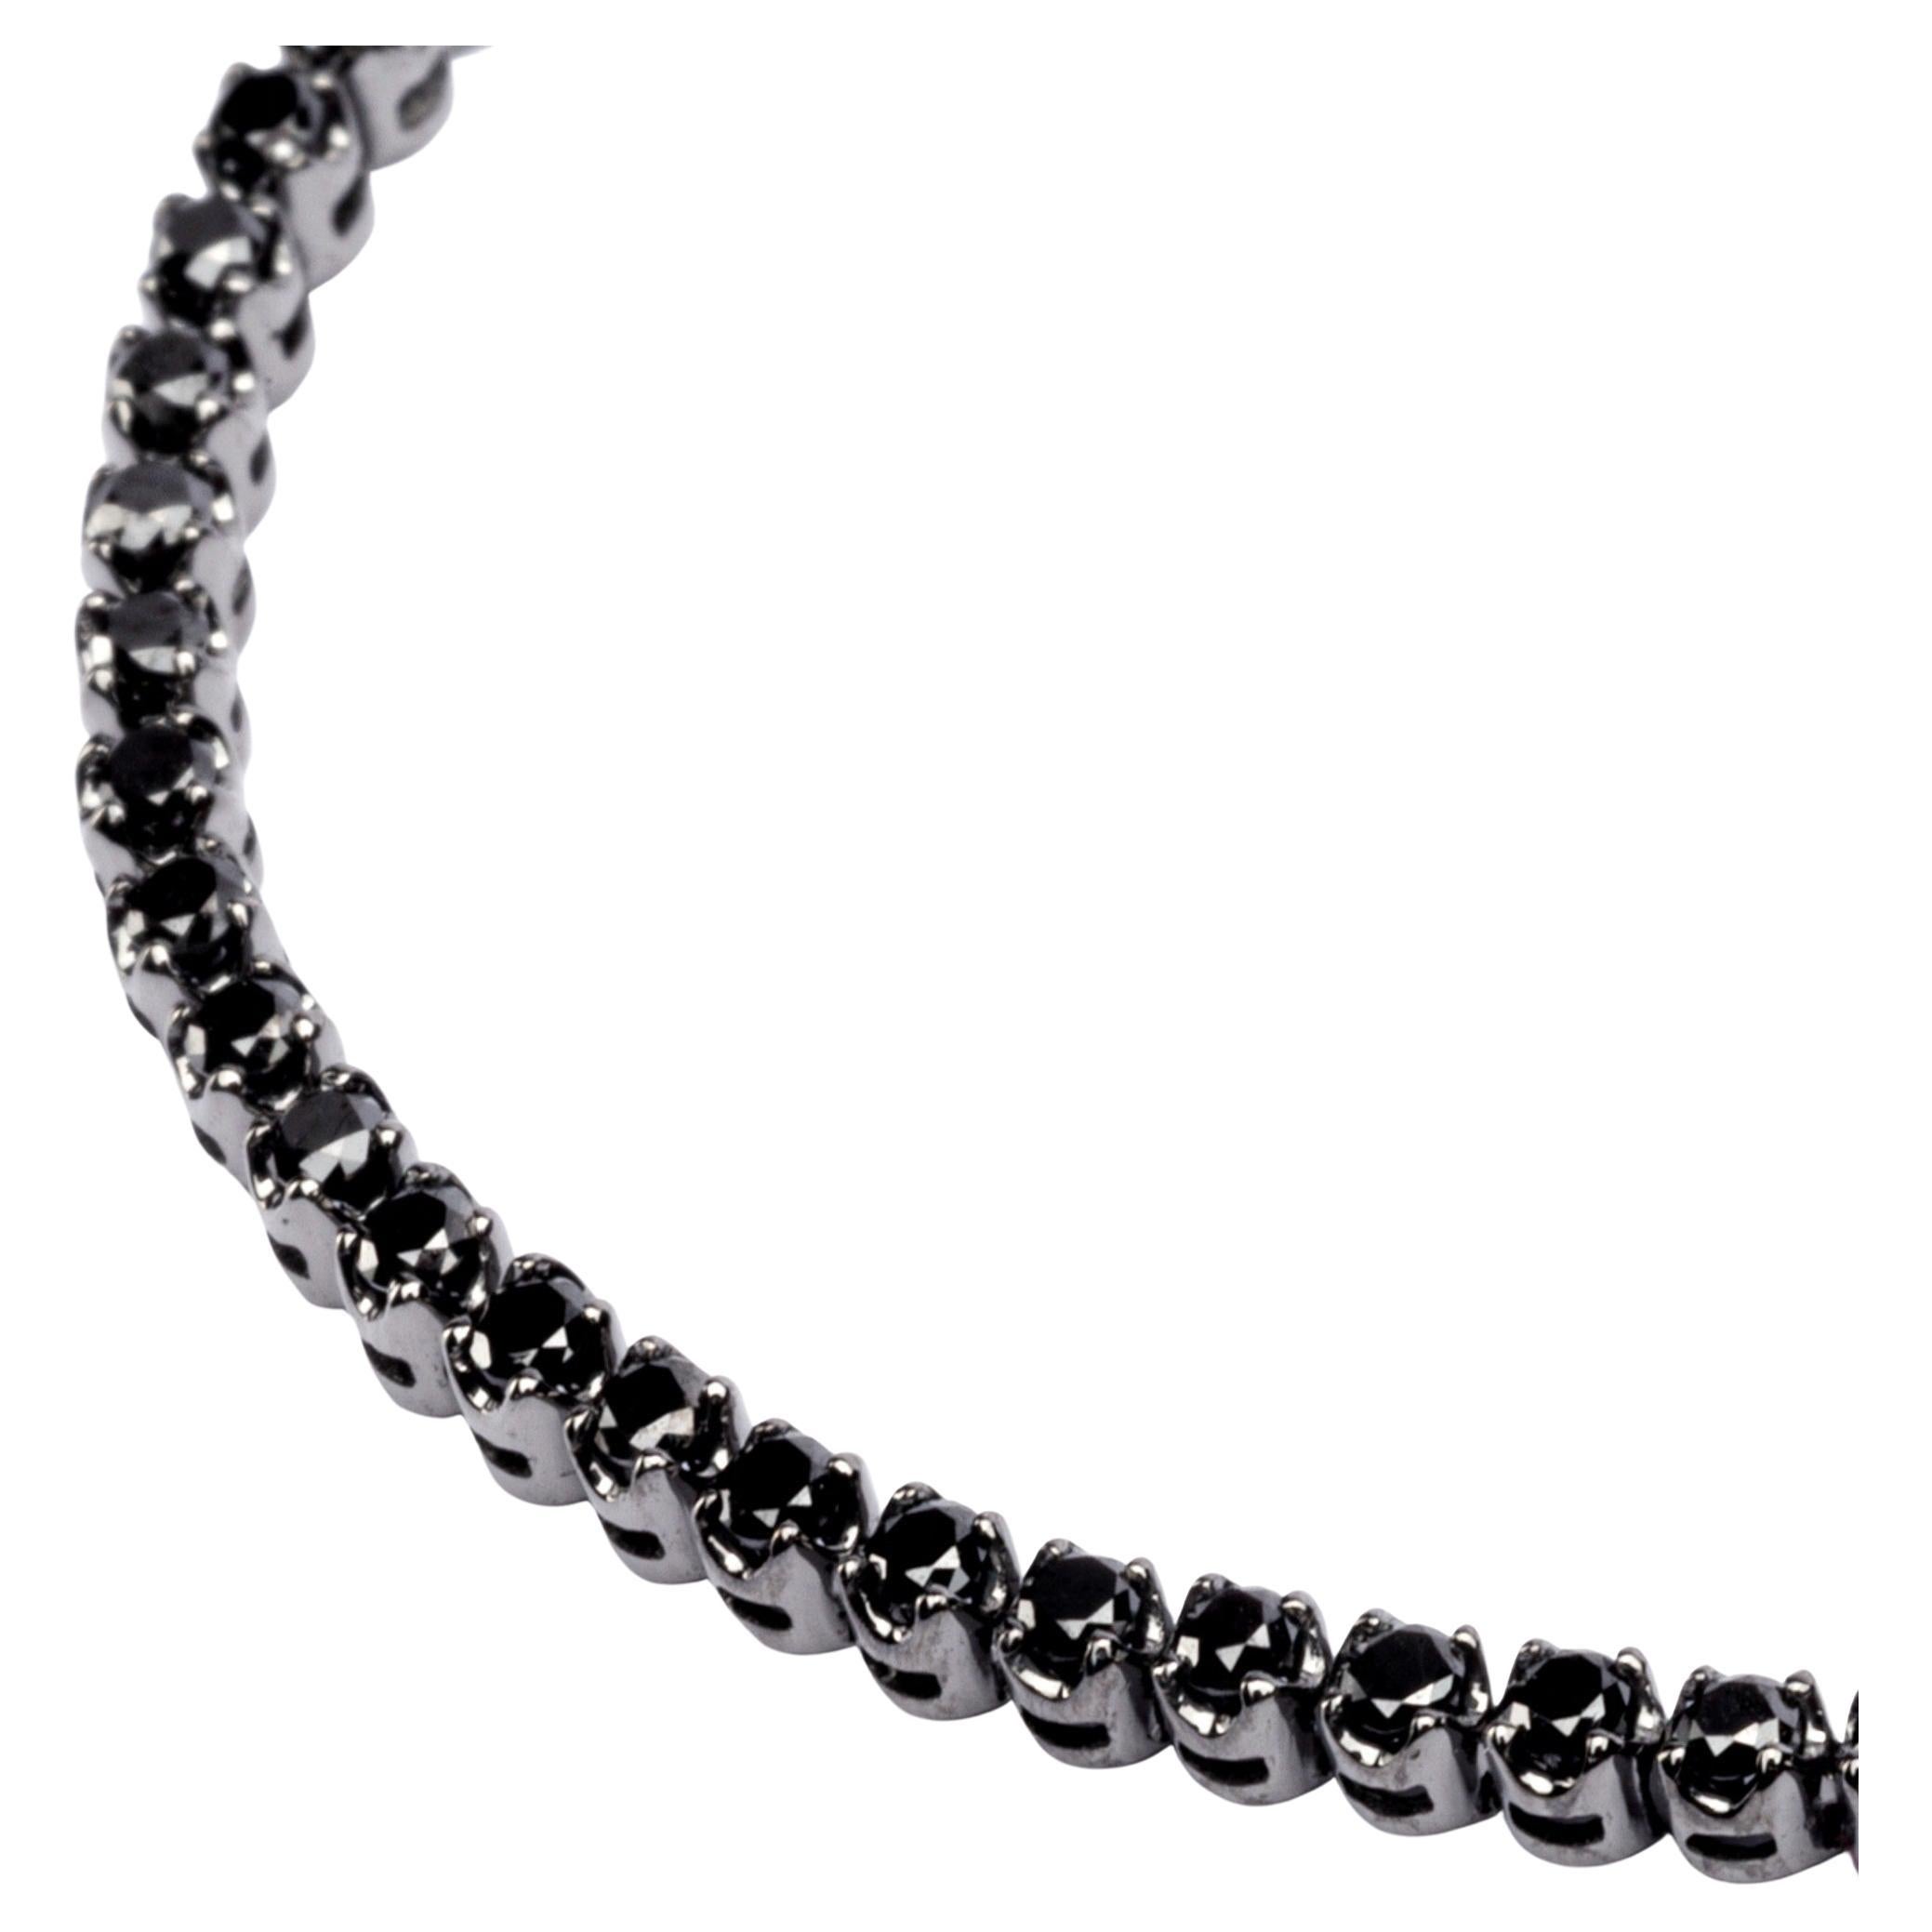 Alex Jona design collection, hand crafted in Italy, 18 karat black rhodium white gold tennis bracelet, 7.48 in/19 cm long, set with black diamonds weighing 1.81 carats in total. 

Alex Jona jewels stand out, not only for their special design and for